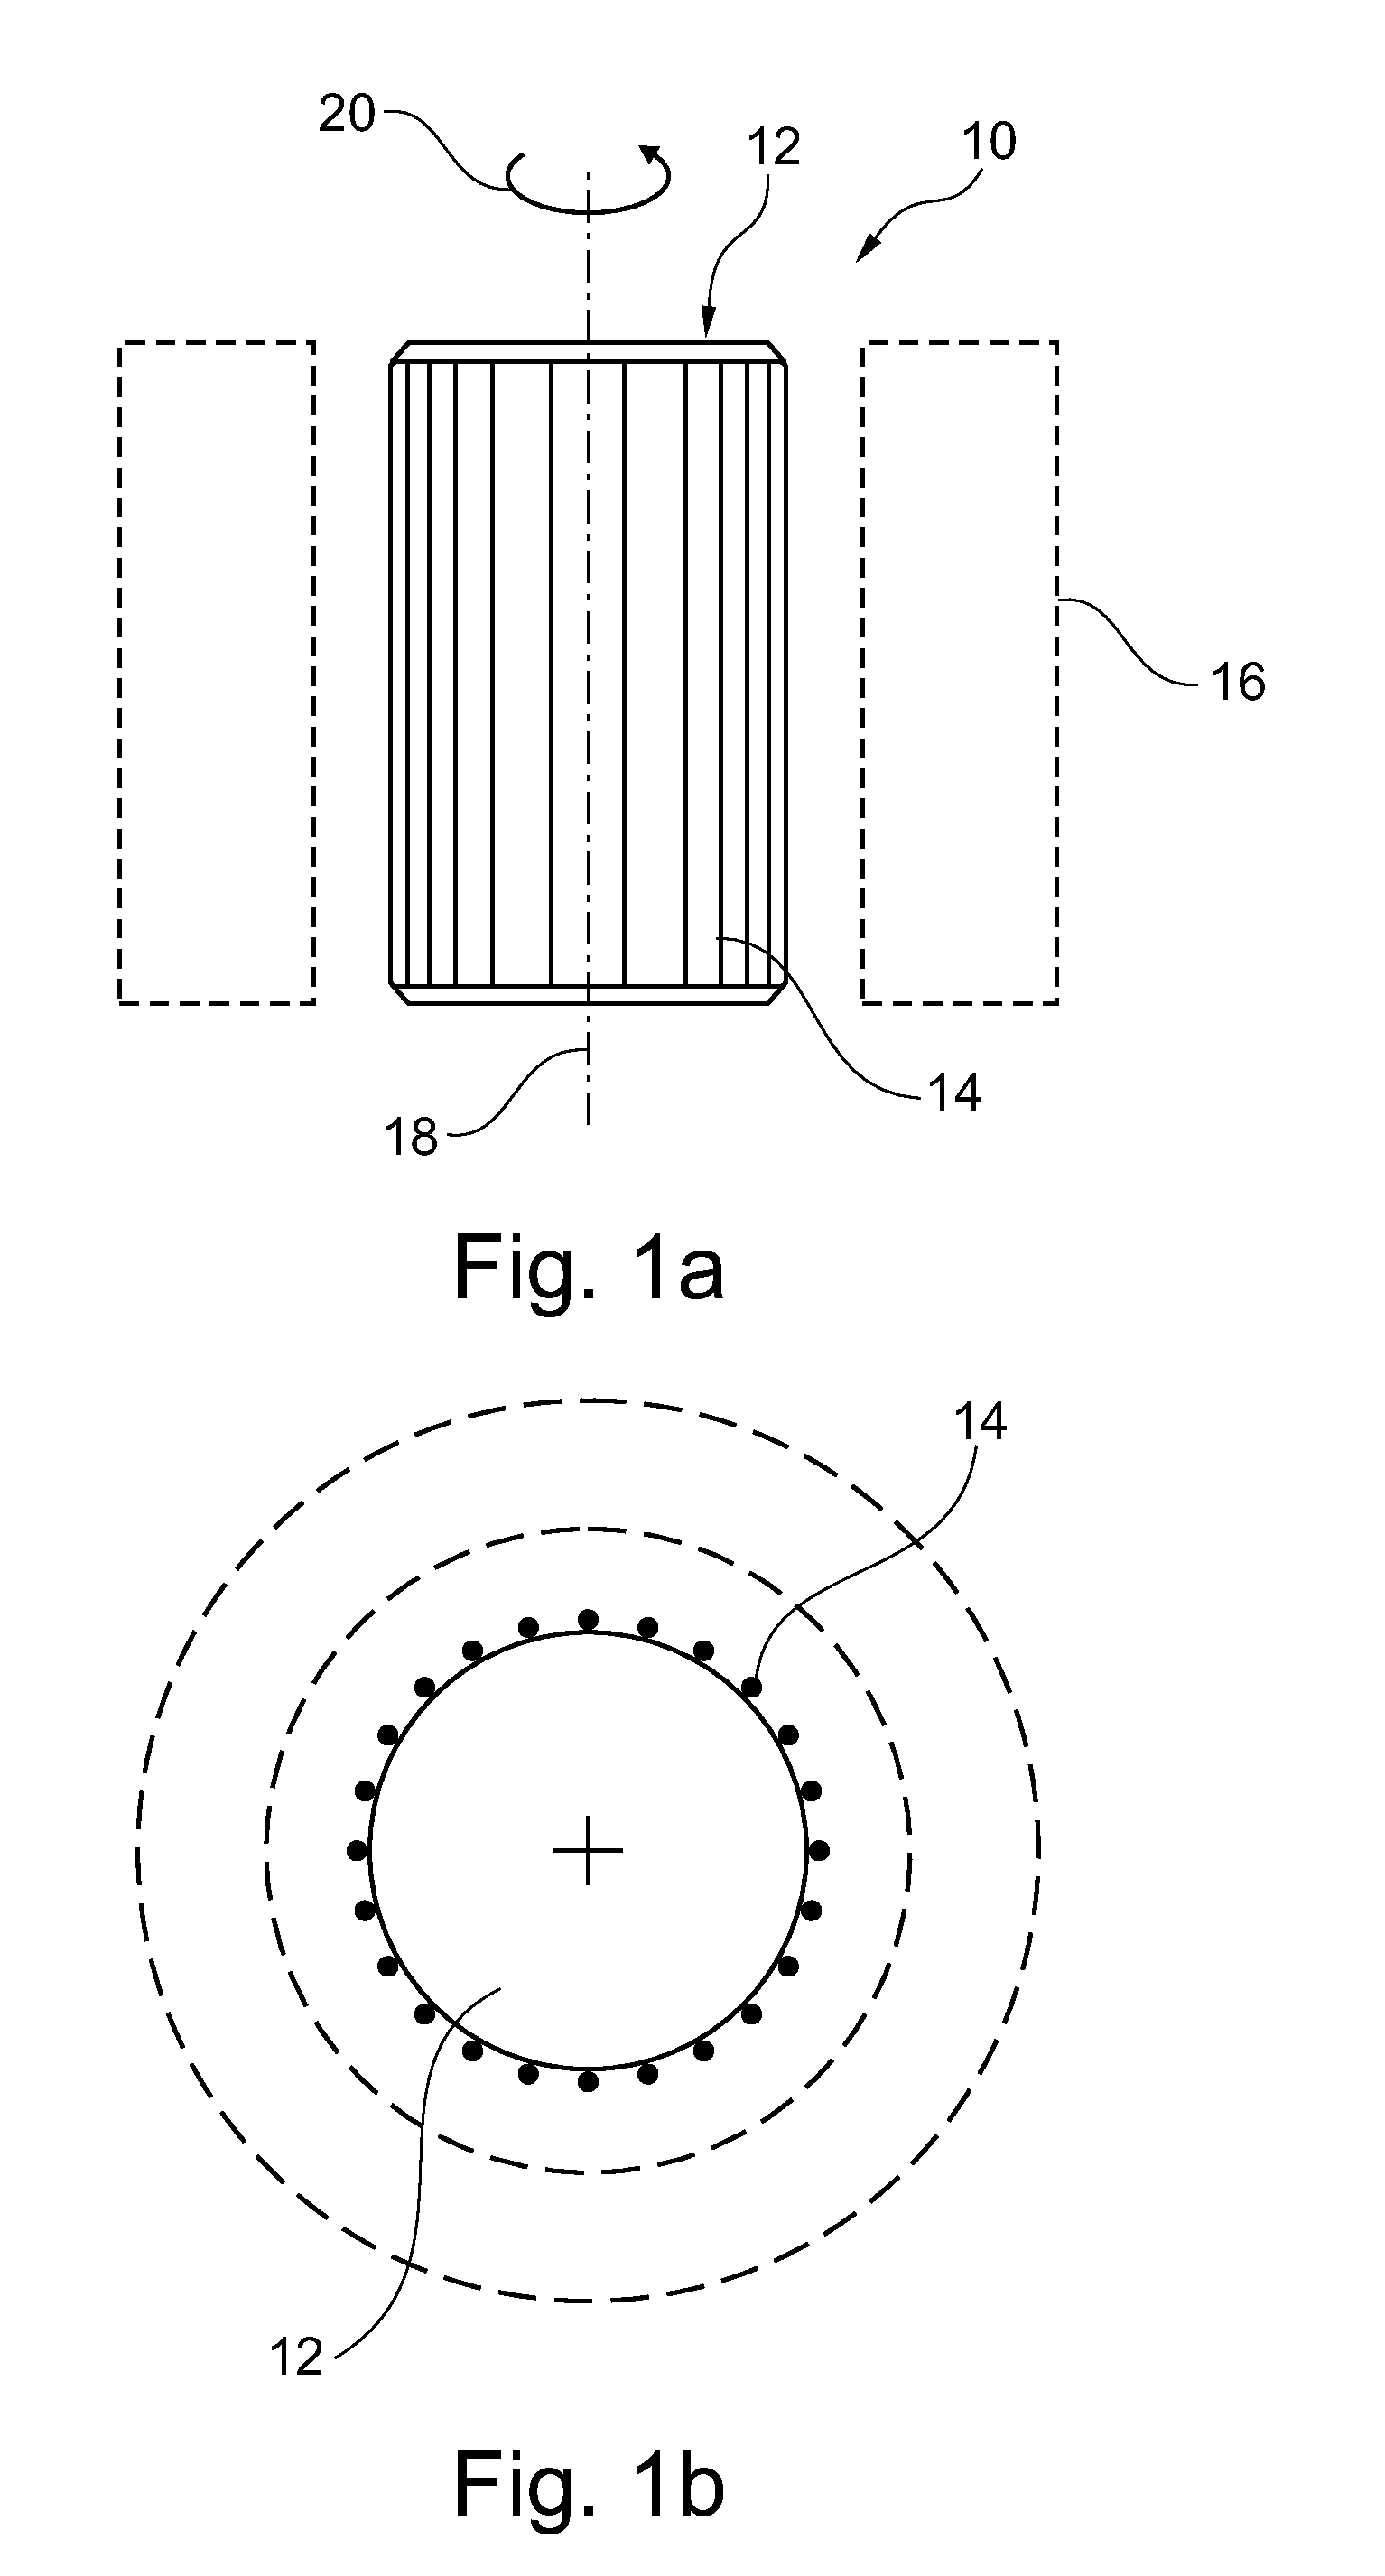 X-ray tube rotor with carbon composite based material